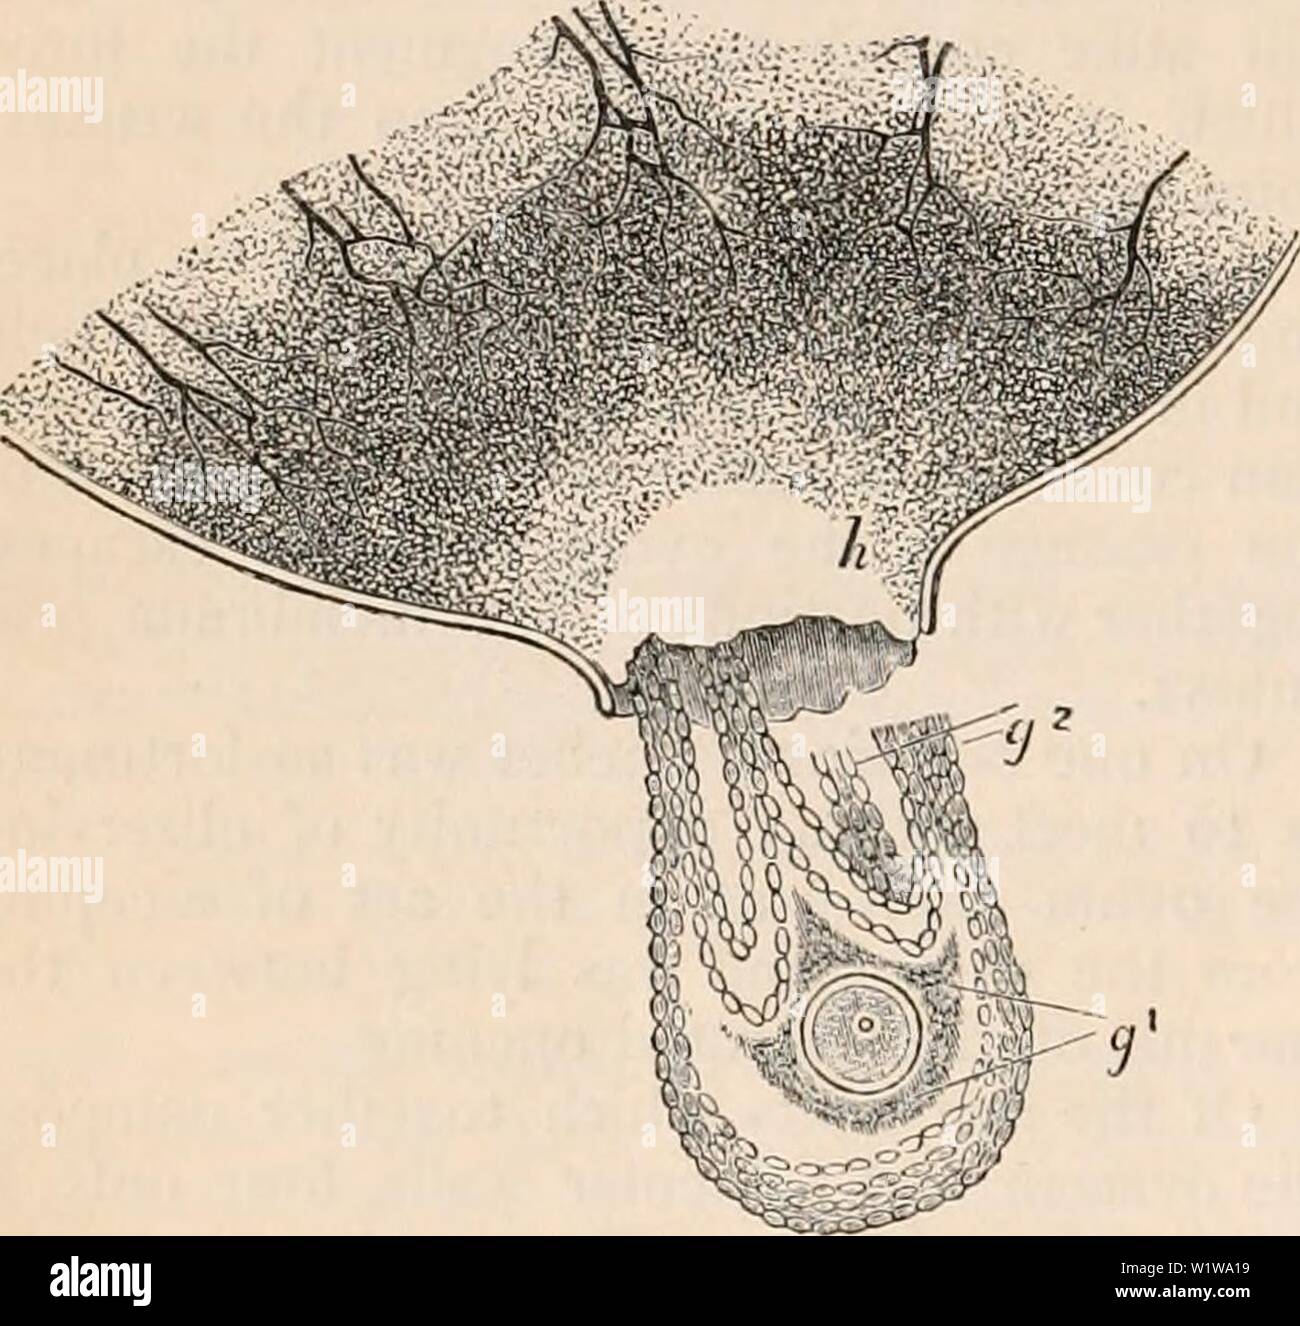 Archive image from page 635 of The cyclopædia of anatomy and. The cyclopædia of anatomy and physiology  cyclopdiaofana05todd Year: 1859 560 UTERUS AND ITS APPENDAGES. cess occurs in the rabbit. Here is represented a portion of a ripe Graafian vesicle, which was upon the point of discharging an ovum. The follicle, after being dissected out of the ovary, has been subjected to slight lateral pressure in the compressorium, by which the follicle has been burst at the point (//) preparing for rup- ture. The ovisac has given way at the thin- nest point, and the ovum, surrounded by the tunica granulos Stock Photo